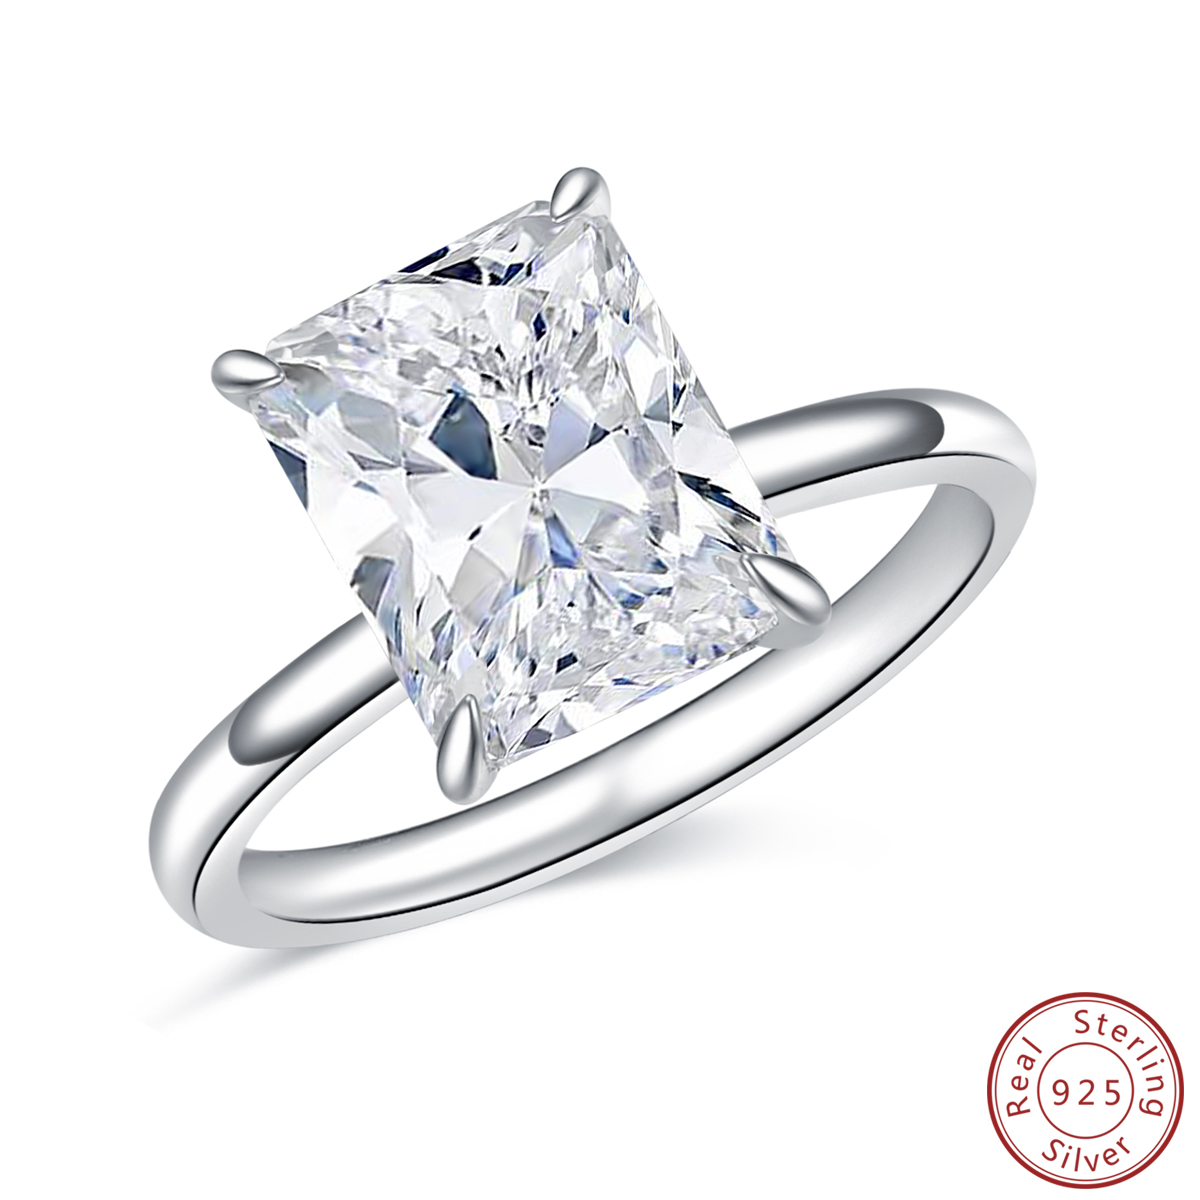 The Elsa - CiciColor S925 Sterling Silver Engagement Moissanite Rings